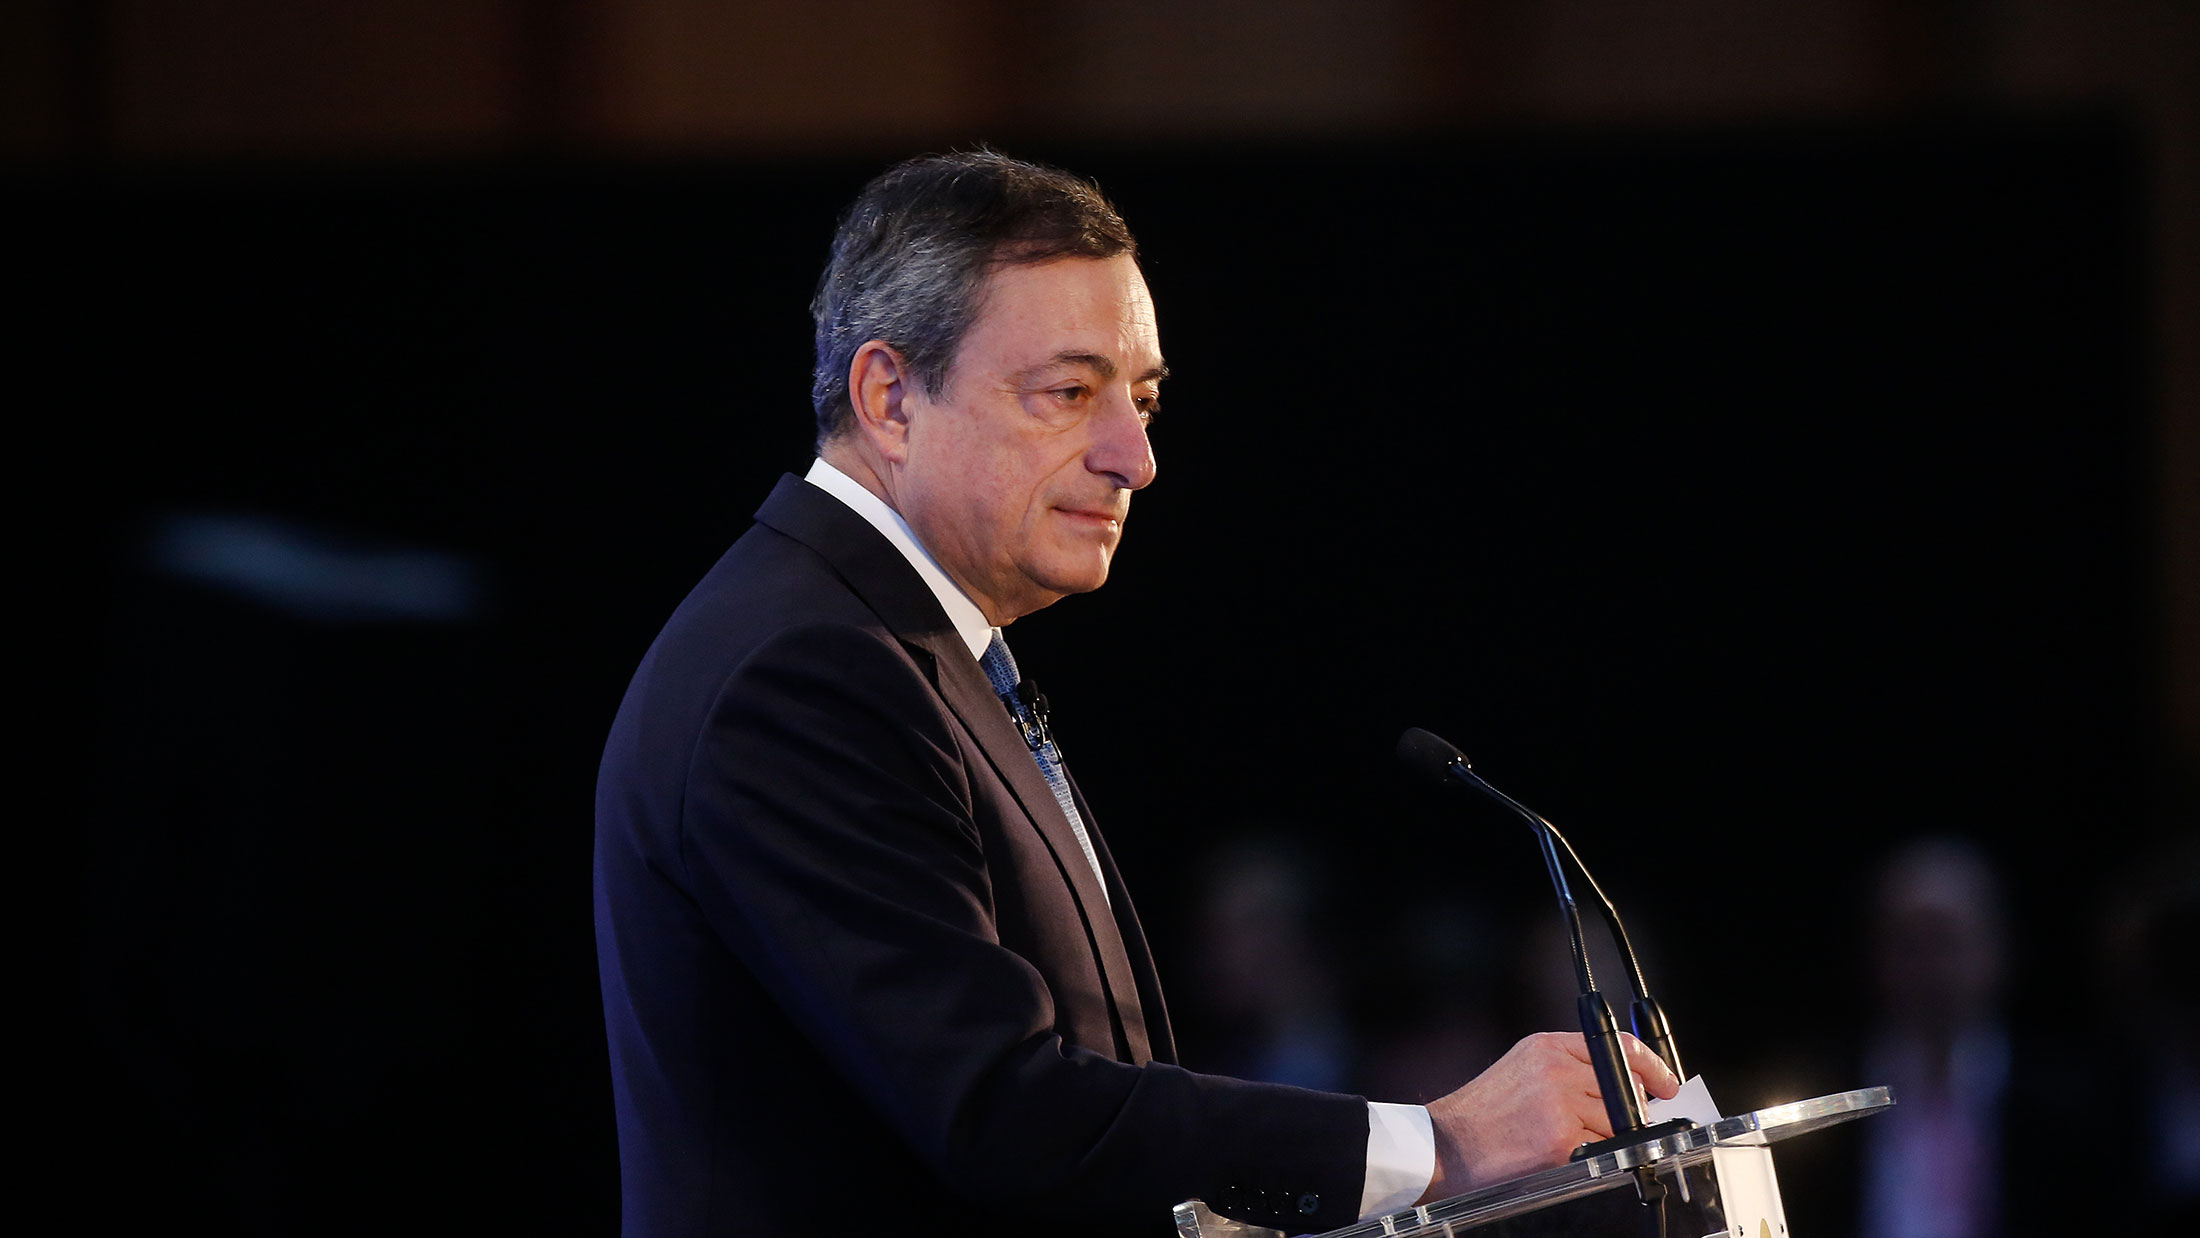 Mario Draghi, president of European Central Bank, speaks at the Bank of England Open Forum at the Guildhall in London on Nov. 11, 2015.
